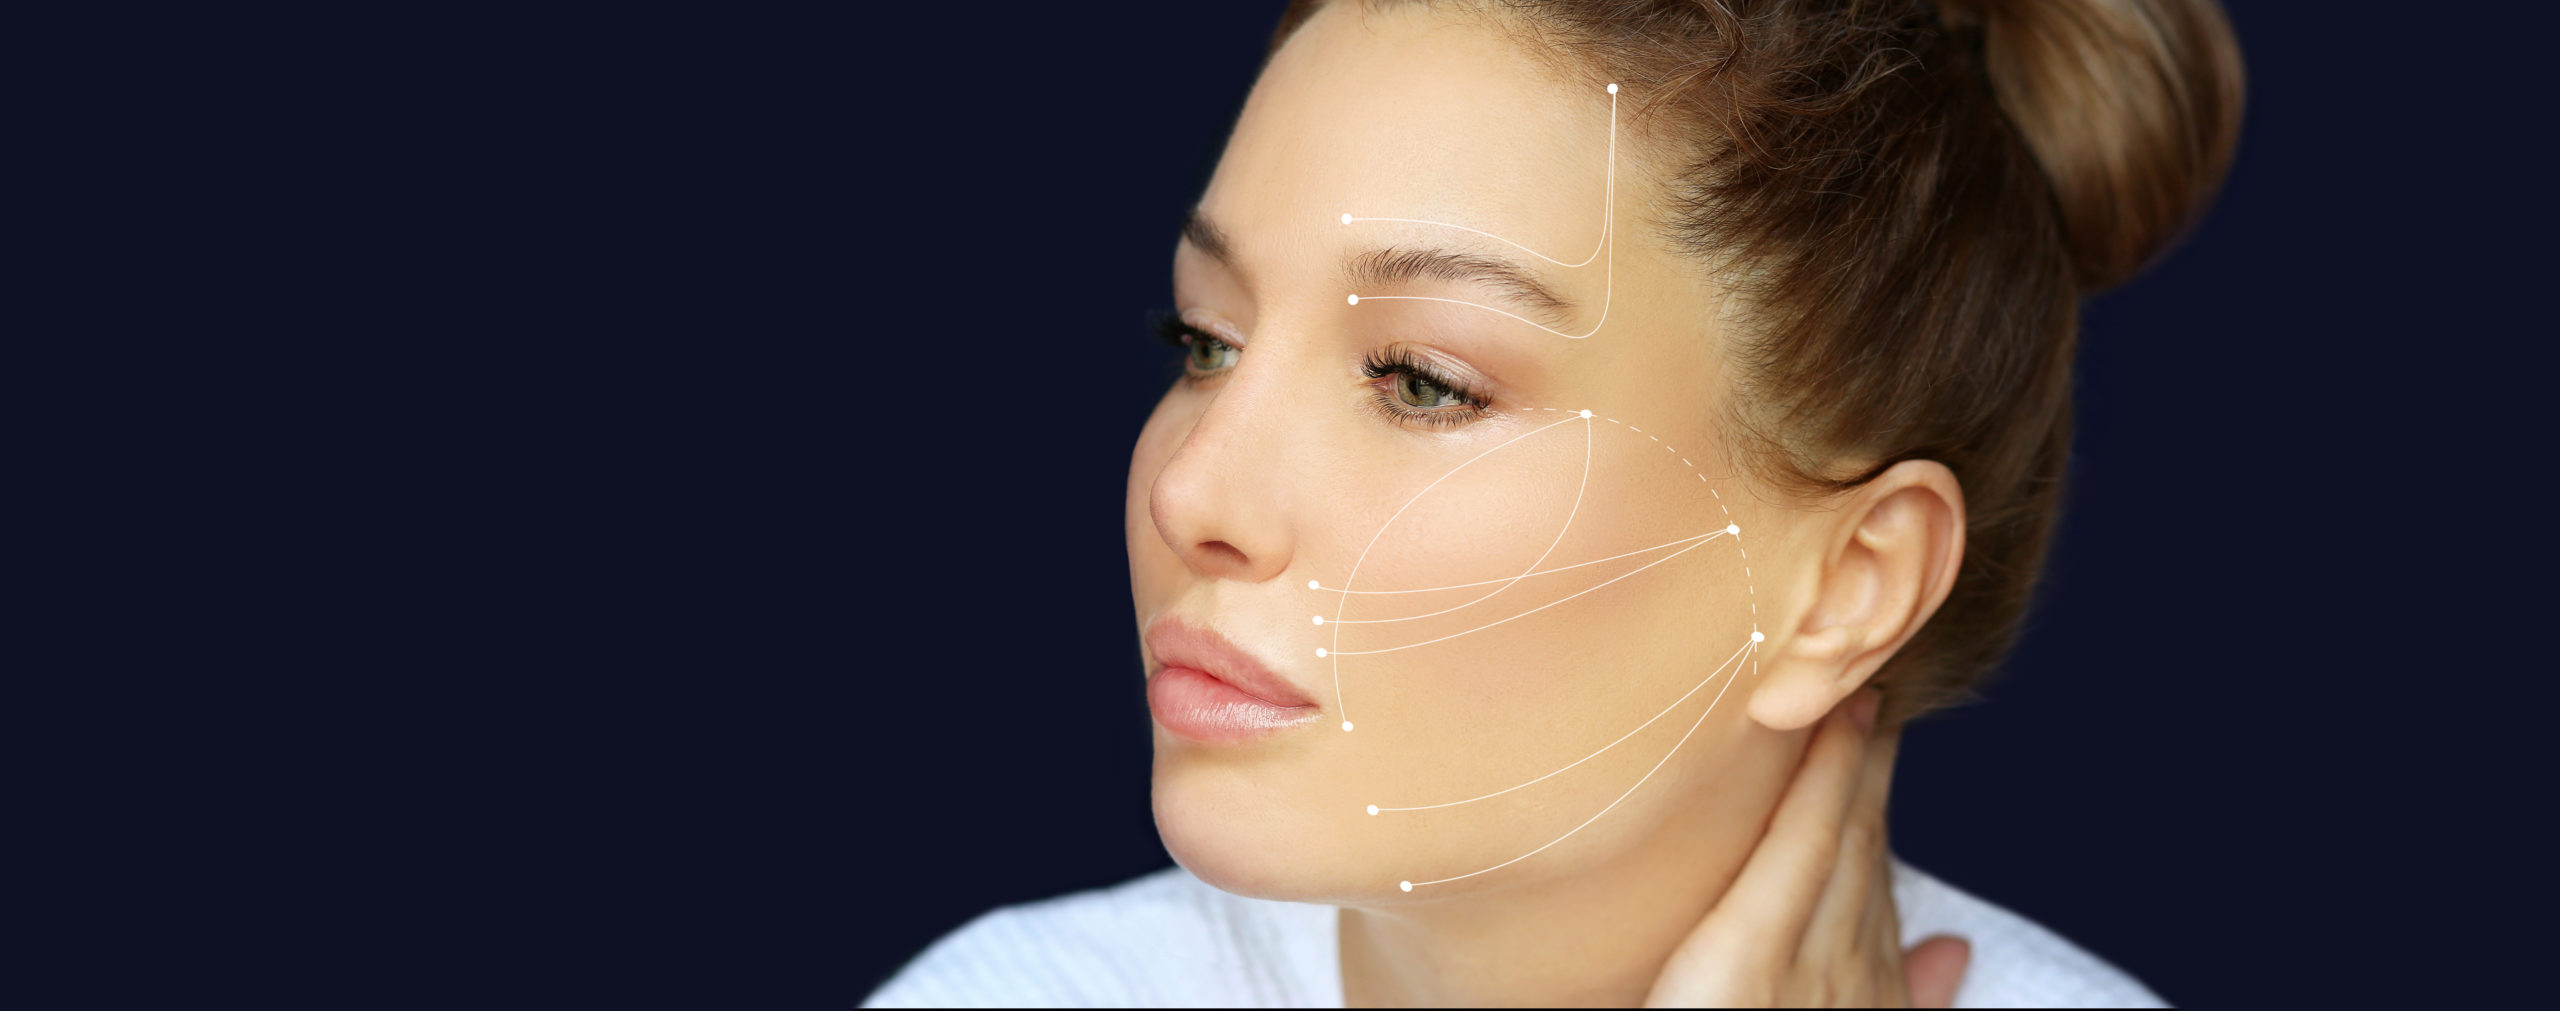 when is the best time to get a nonsurgical facelift in Ascot